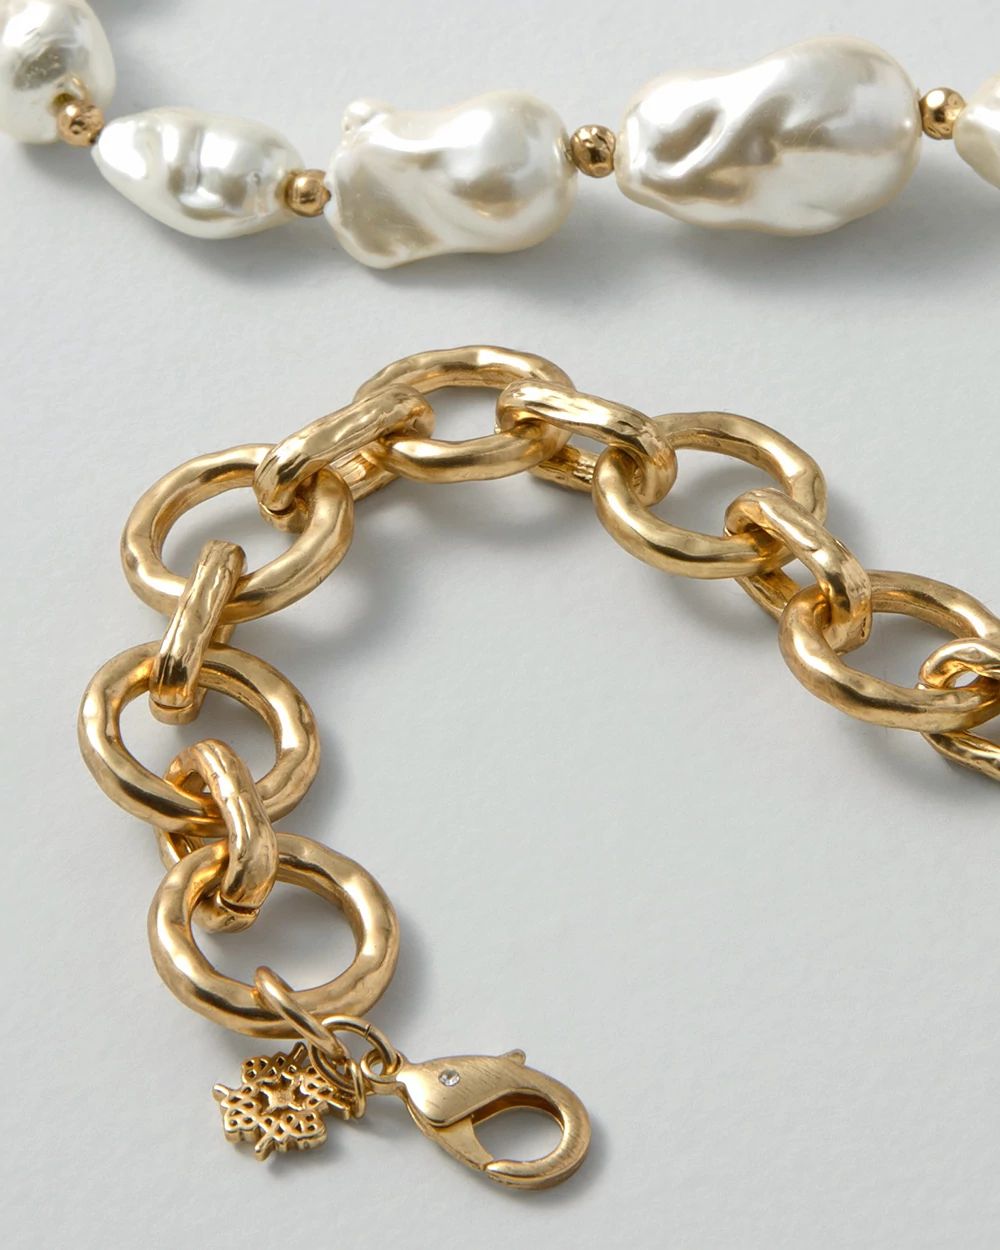 Goldtone Chain & Faux Pearl Necklace click to view larger image.